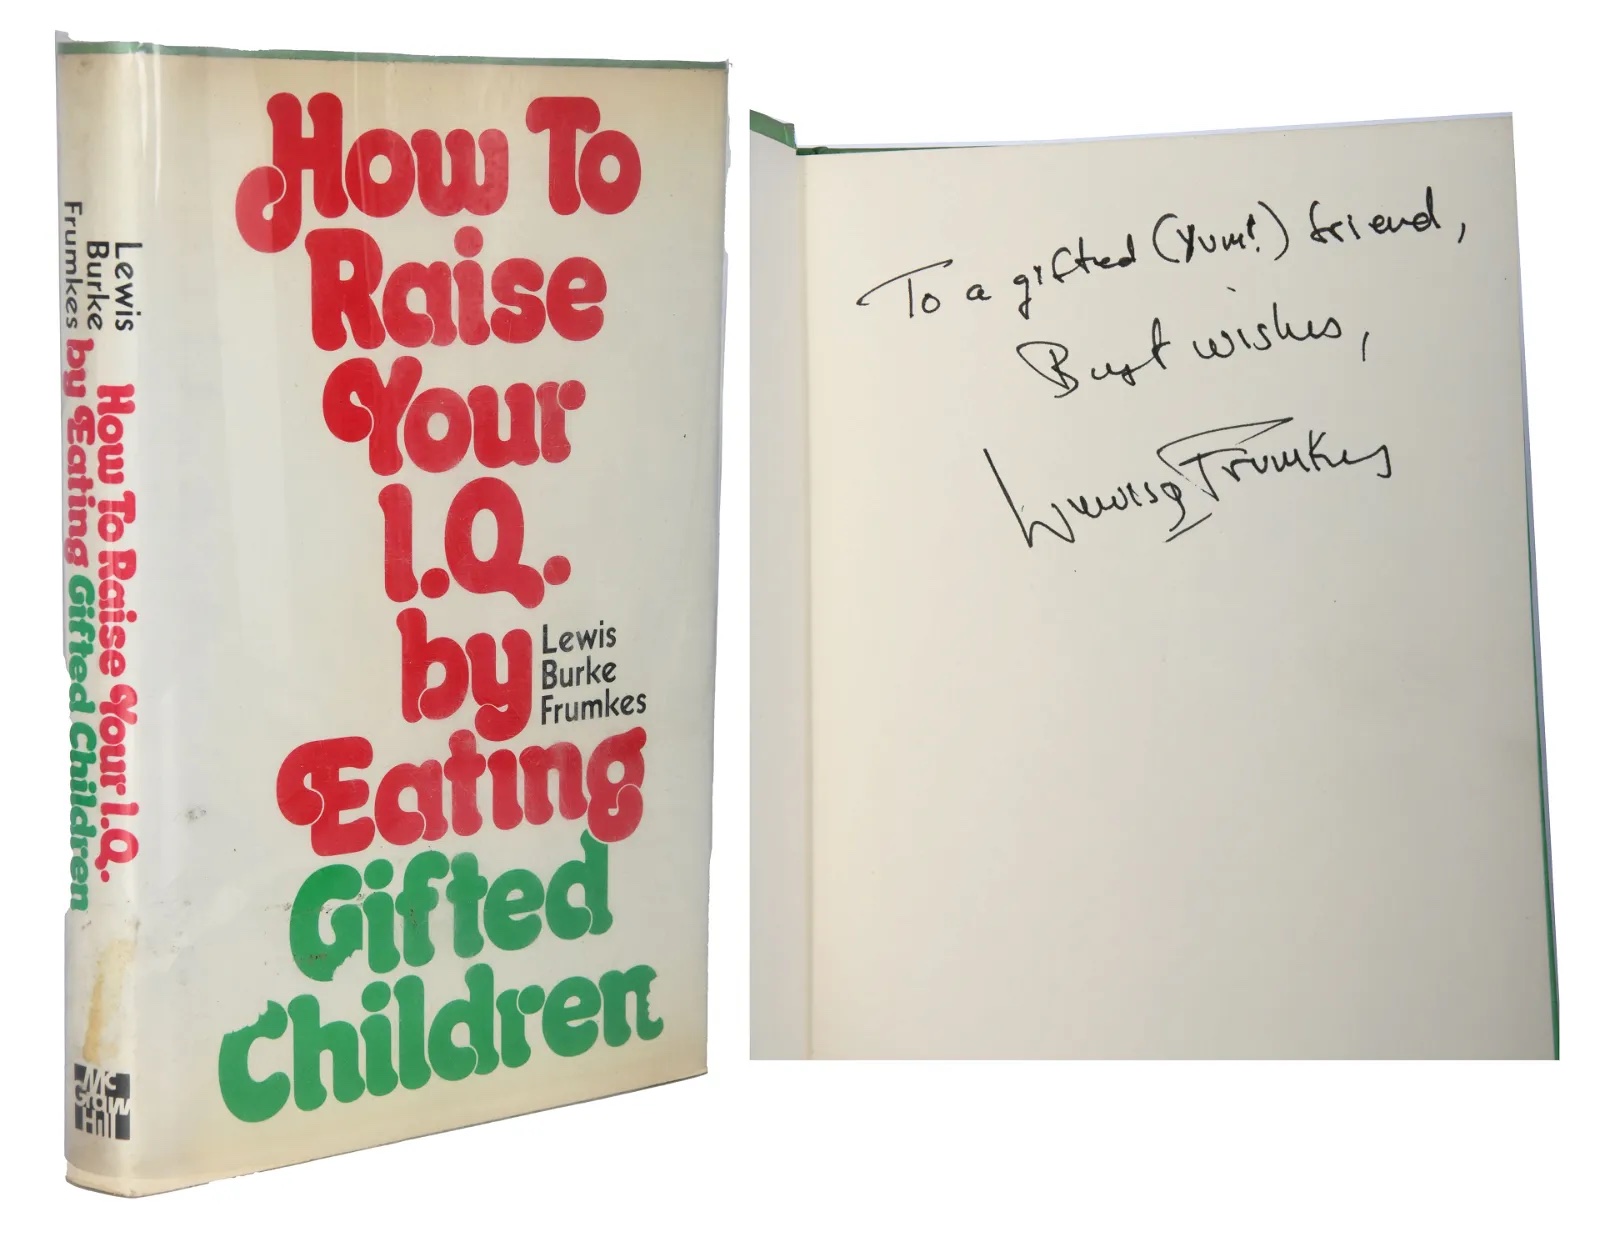 Signed presentation copy of 'How to Raise Your IQ by Eating Gifted Children' by Lewis Burke Frumkes, estimated at $800-$1,200 at La Belle Epoque.